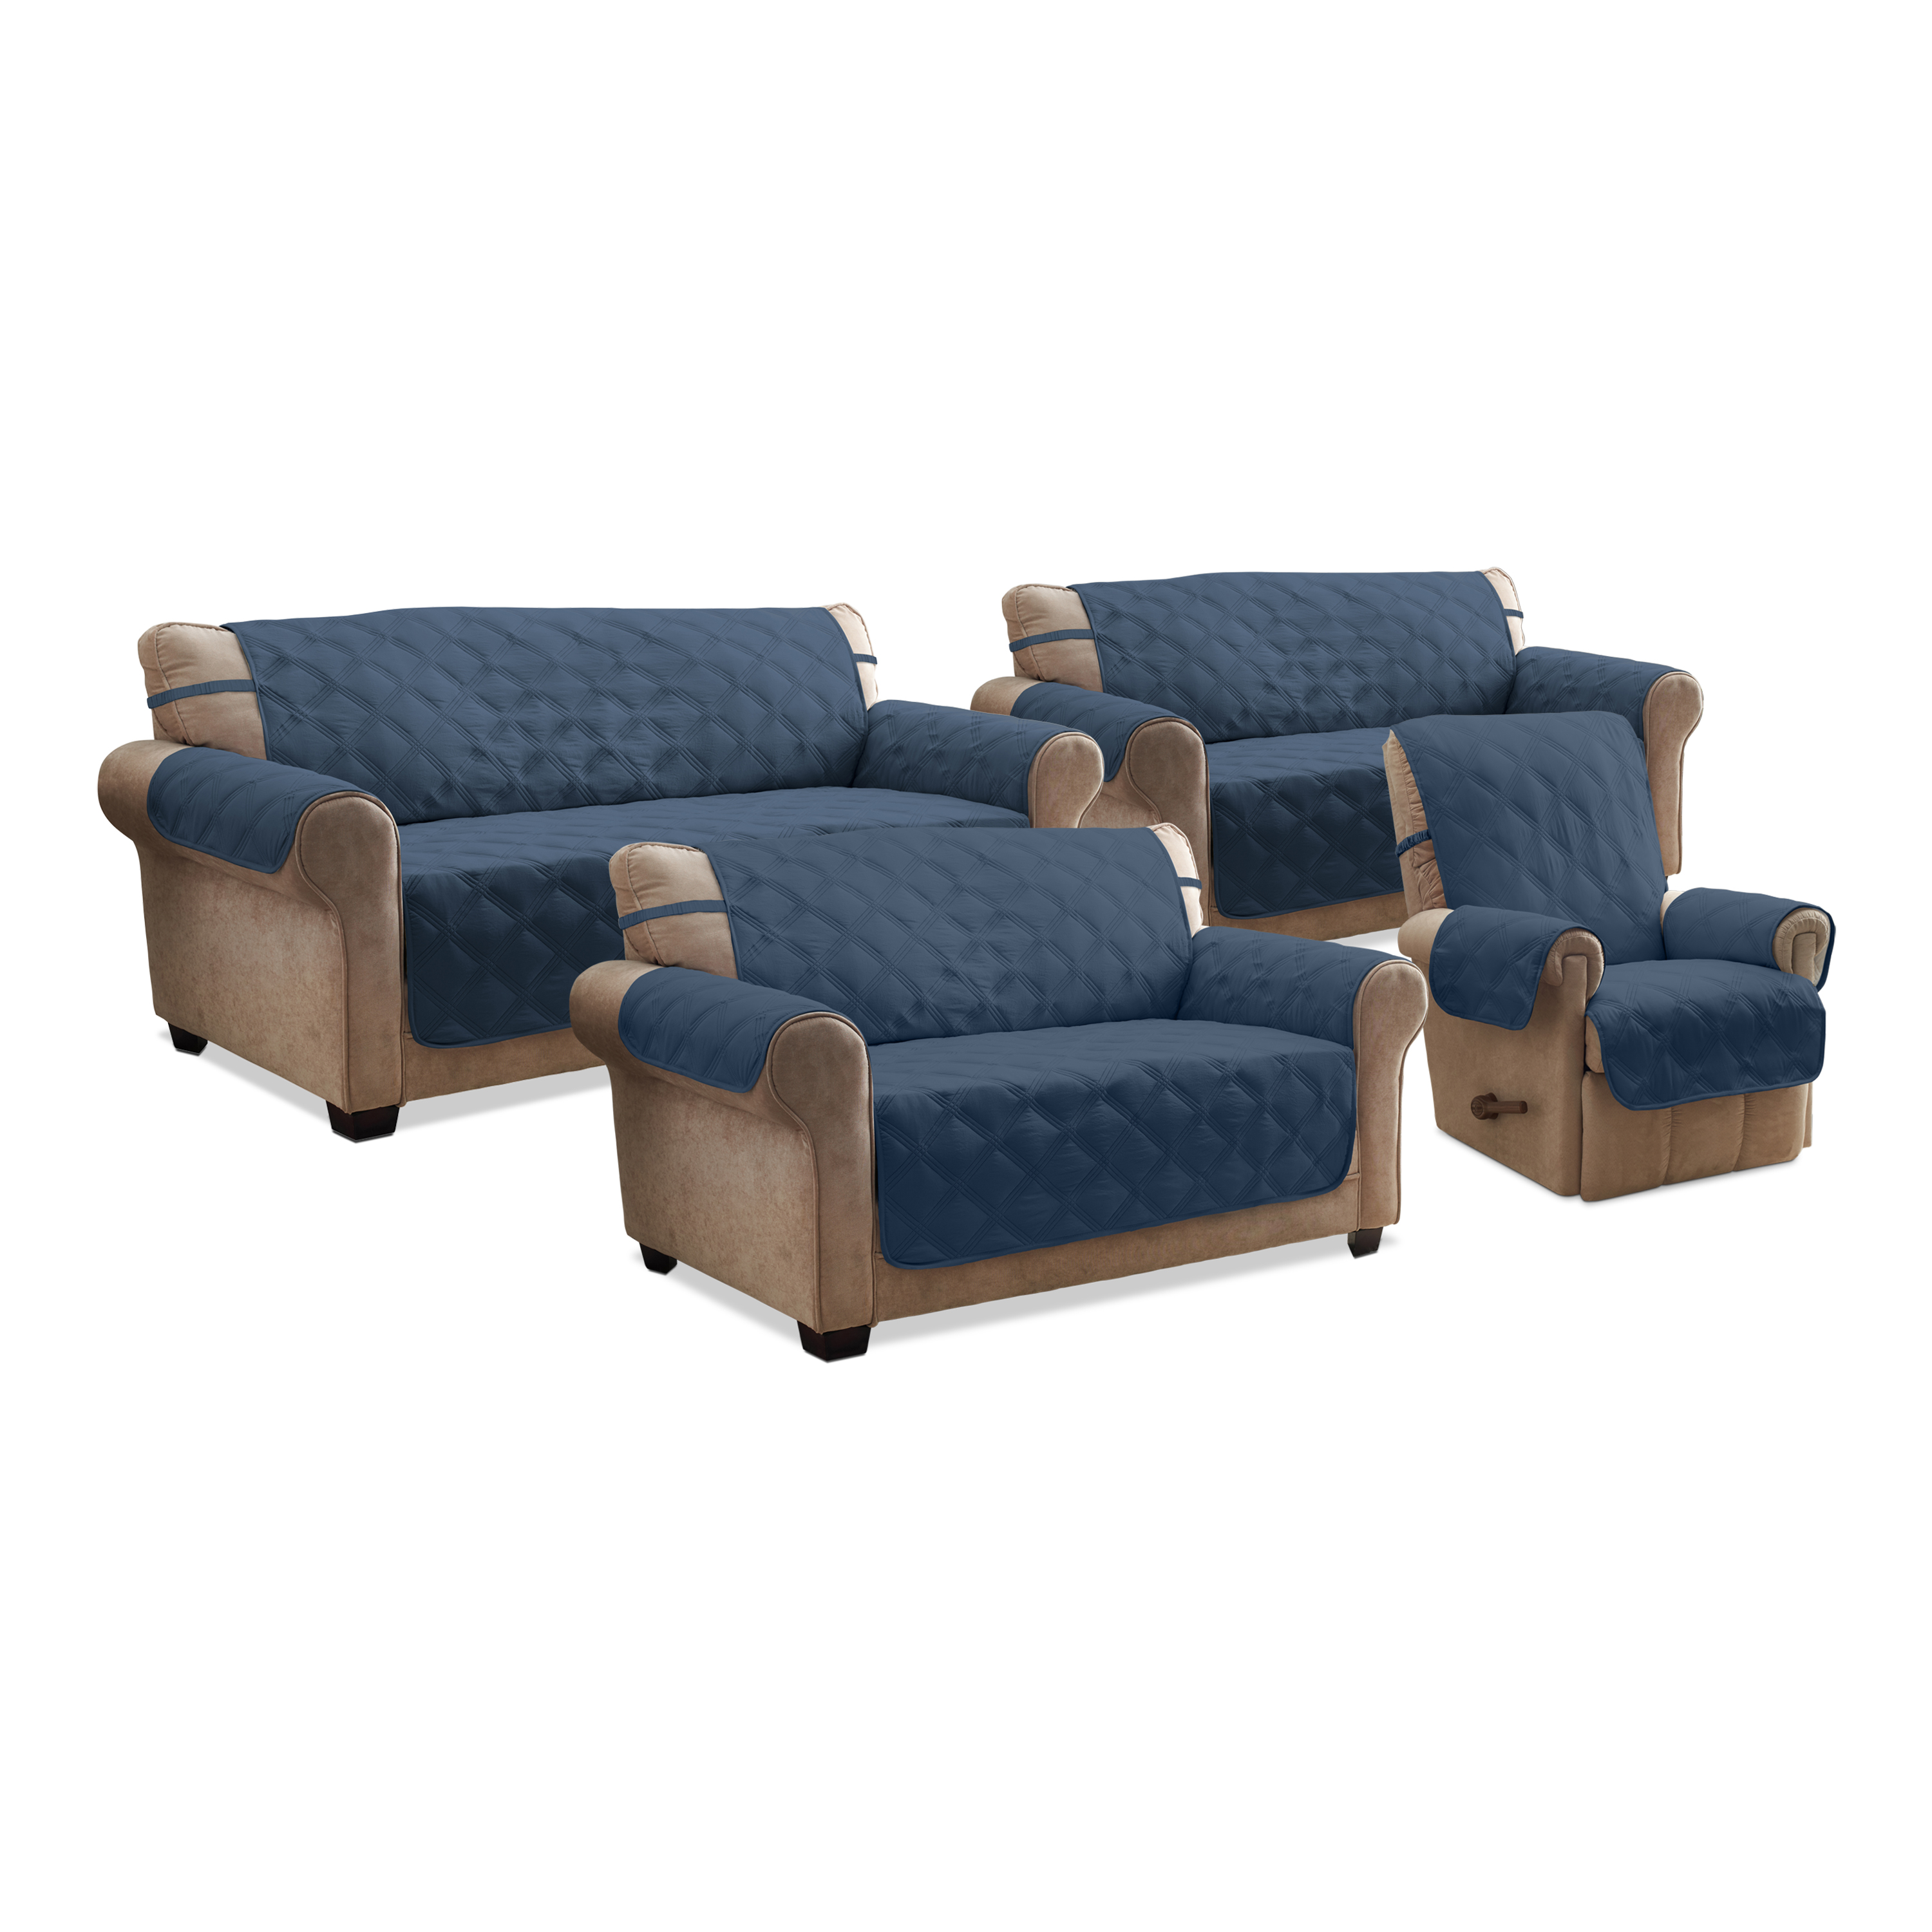 Innovative Textile Solutions 1-piece Hampton Diamond Secure Fit Loveseat Furniture Cover, Blue - image 5 of 7